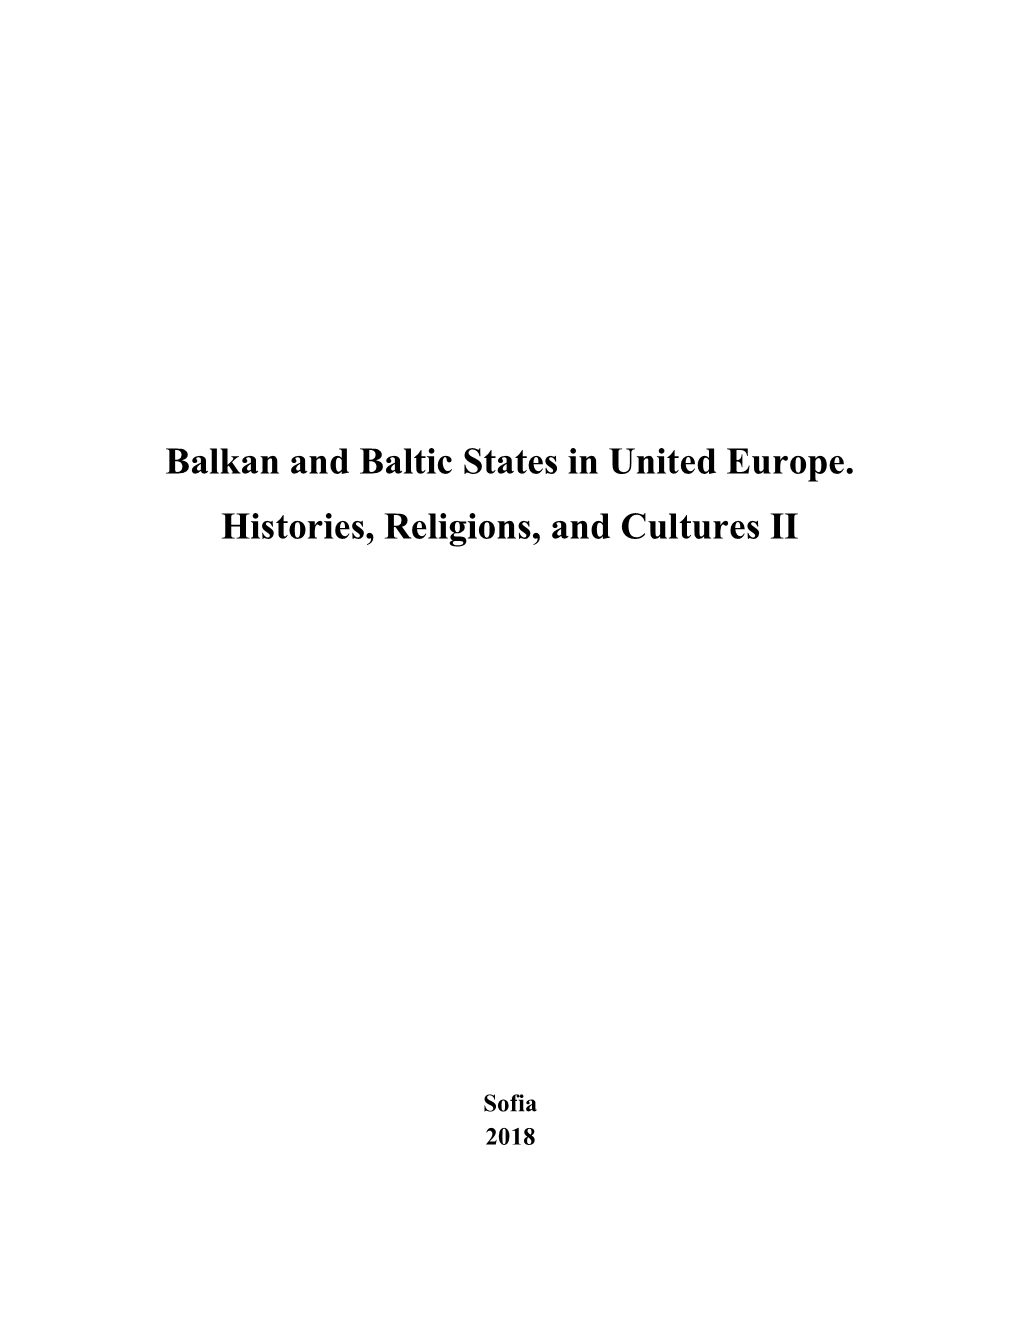 Balkan and Baltic States in United Europe. Histories, Religions, and Cultures II